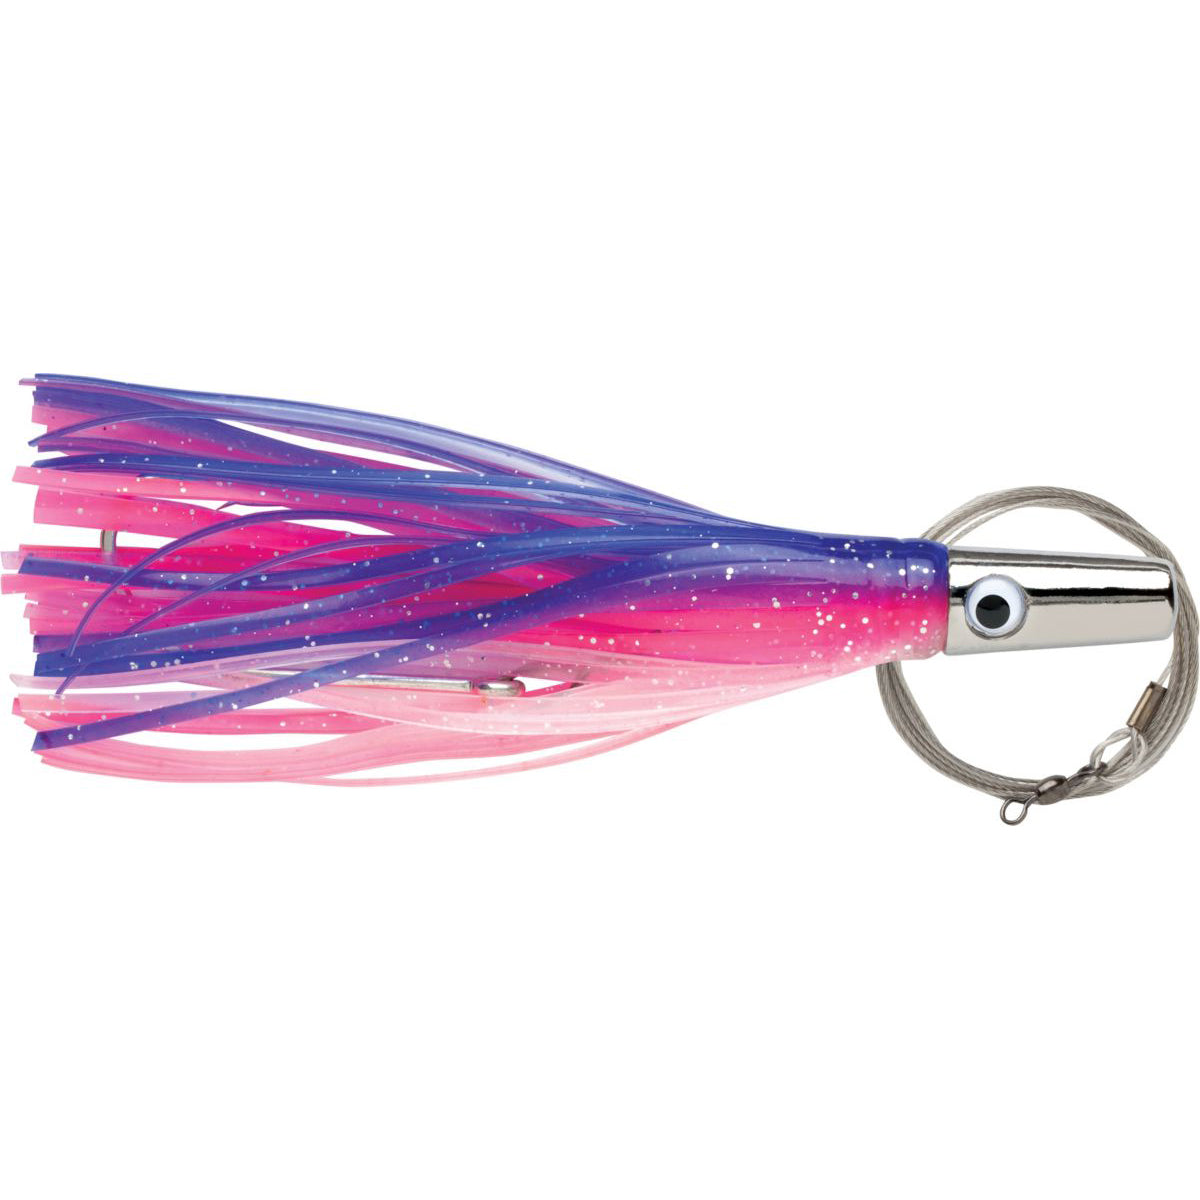 Williamson Wahoo Catcher 6 Rigged Blue Pink Silver